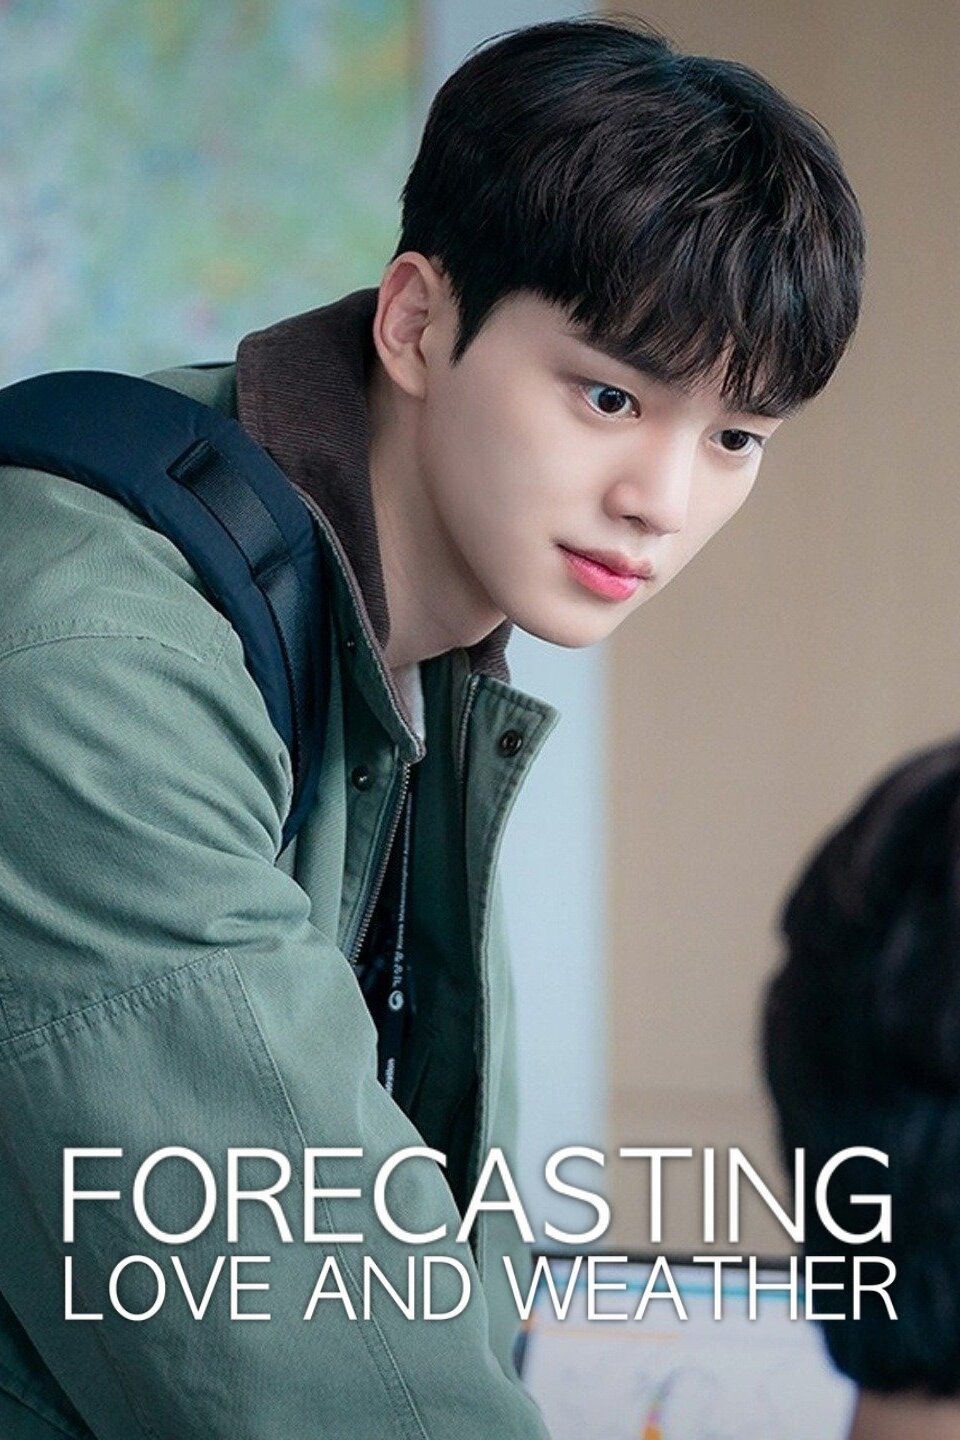 Love and weather cast forecasting Park Min